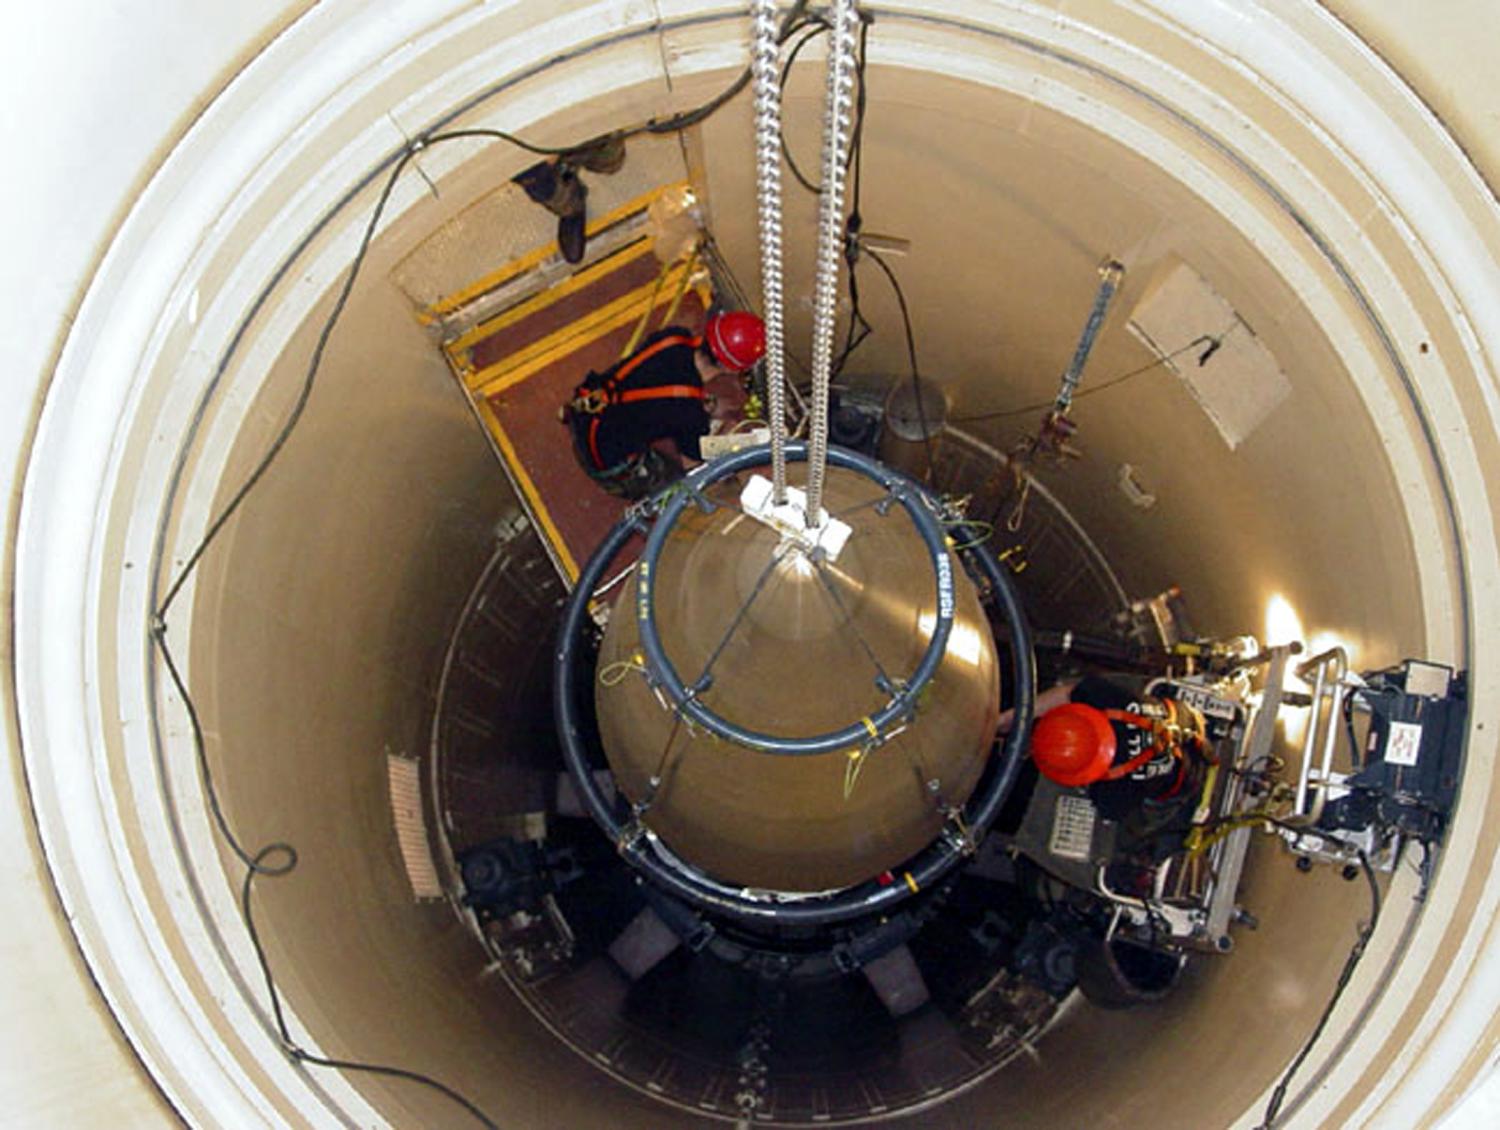 A US Air Force missile maintenance team removes the upper section of an intercontinental ballistic missile with a nuclear warhead in an undated USAF photo at Malmstrom Air Force Base, Montana. Reviews of the U.S. nuclear arsenal show significant changes are needed to ensure the security and effectiveness of the force, a Defense Department report said November 14, 2014.  REUTERS/USAF/Airman John Parie/handout via Reuters (UNITED STATES - Tags: MILITARY POLITICS) FOR EDITORIAL USE ONLY. NOT FOR SALE FOR MARKETING OR ADVERTISING CAMPAIGNS. THIS IMAGE HAS BEEN SUPPLIED BY A THIRD PARTY. IT IS DISTRIBUTED, EXACTLY AS RECEIVED BY REUTERS, AS A SERVICE TO CLIENTS - TM3EABE0Z0U01